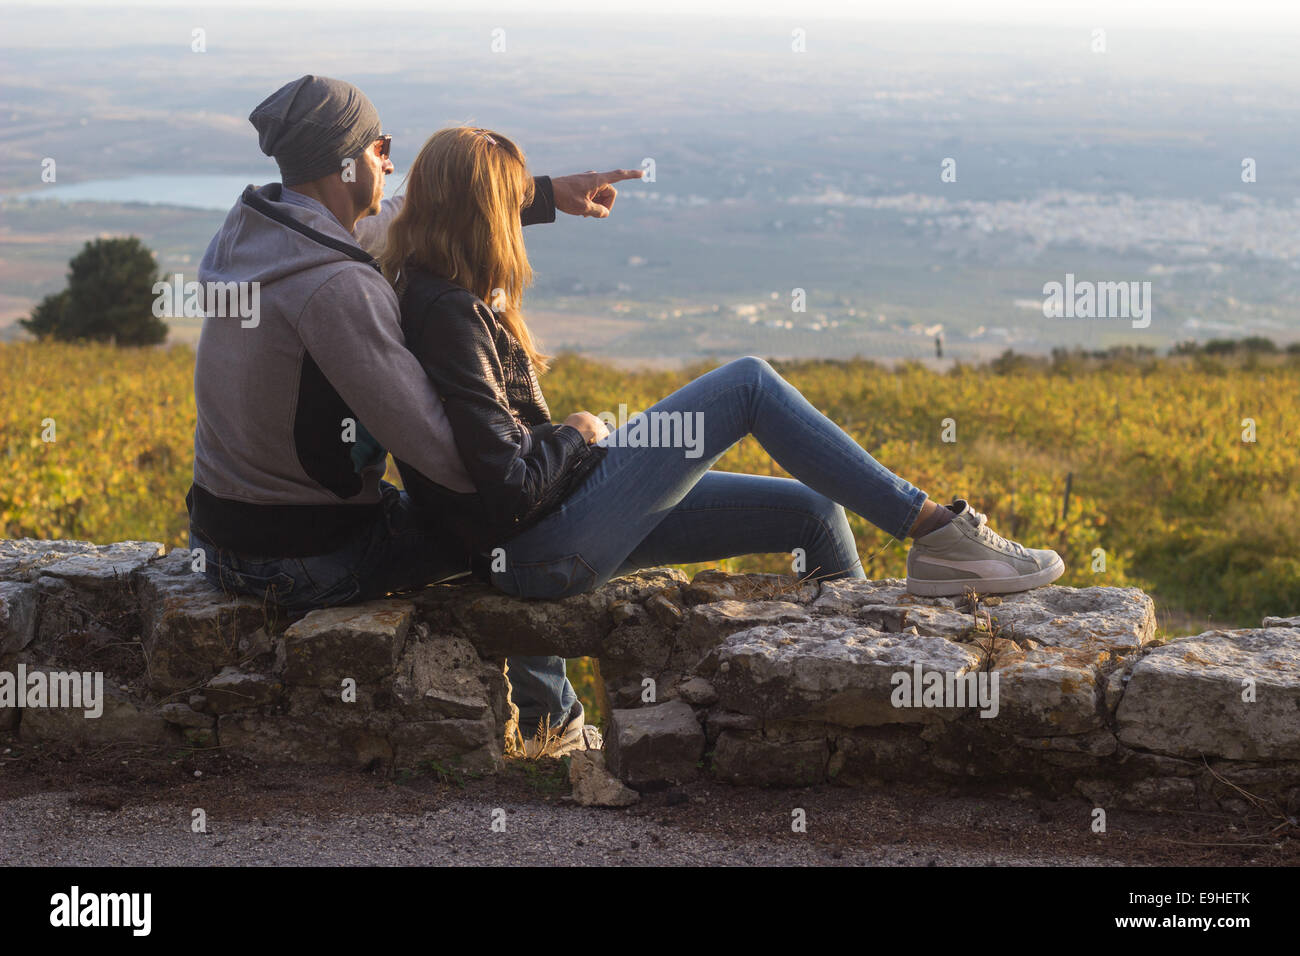 couple date dating outdoors spring 'copy space' relationship sunset silhouettes hug vacation Stock Photo